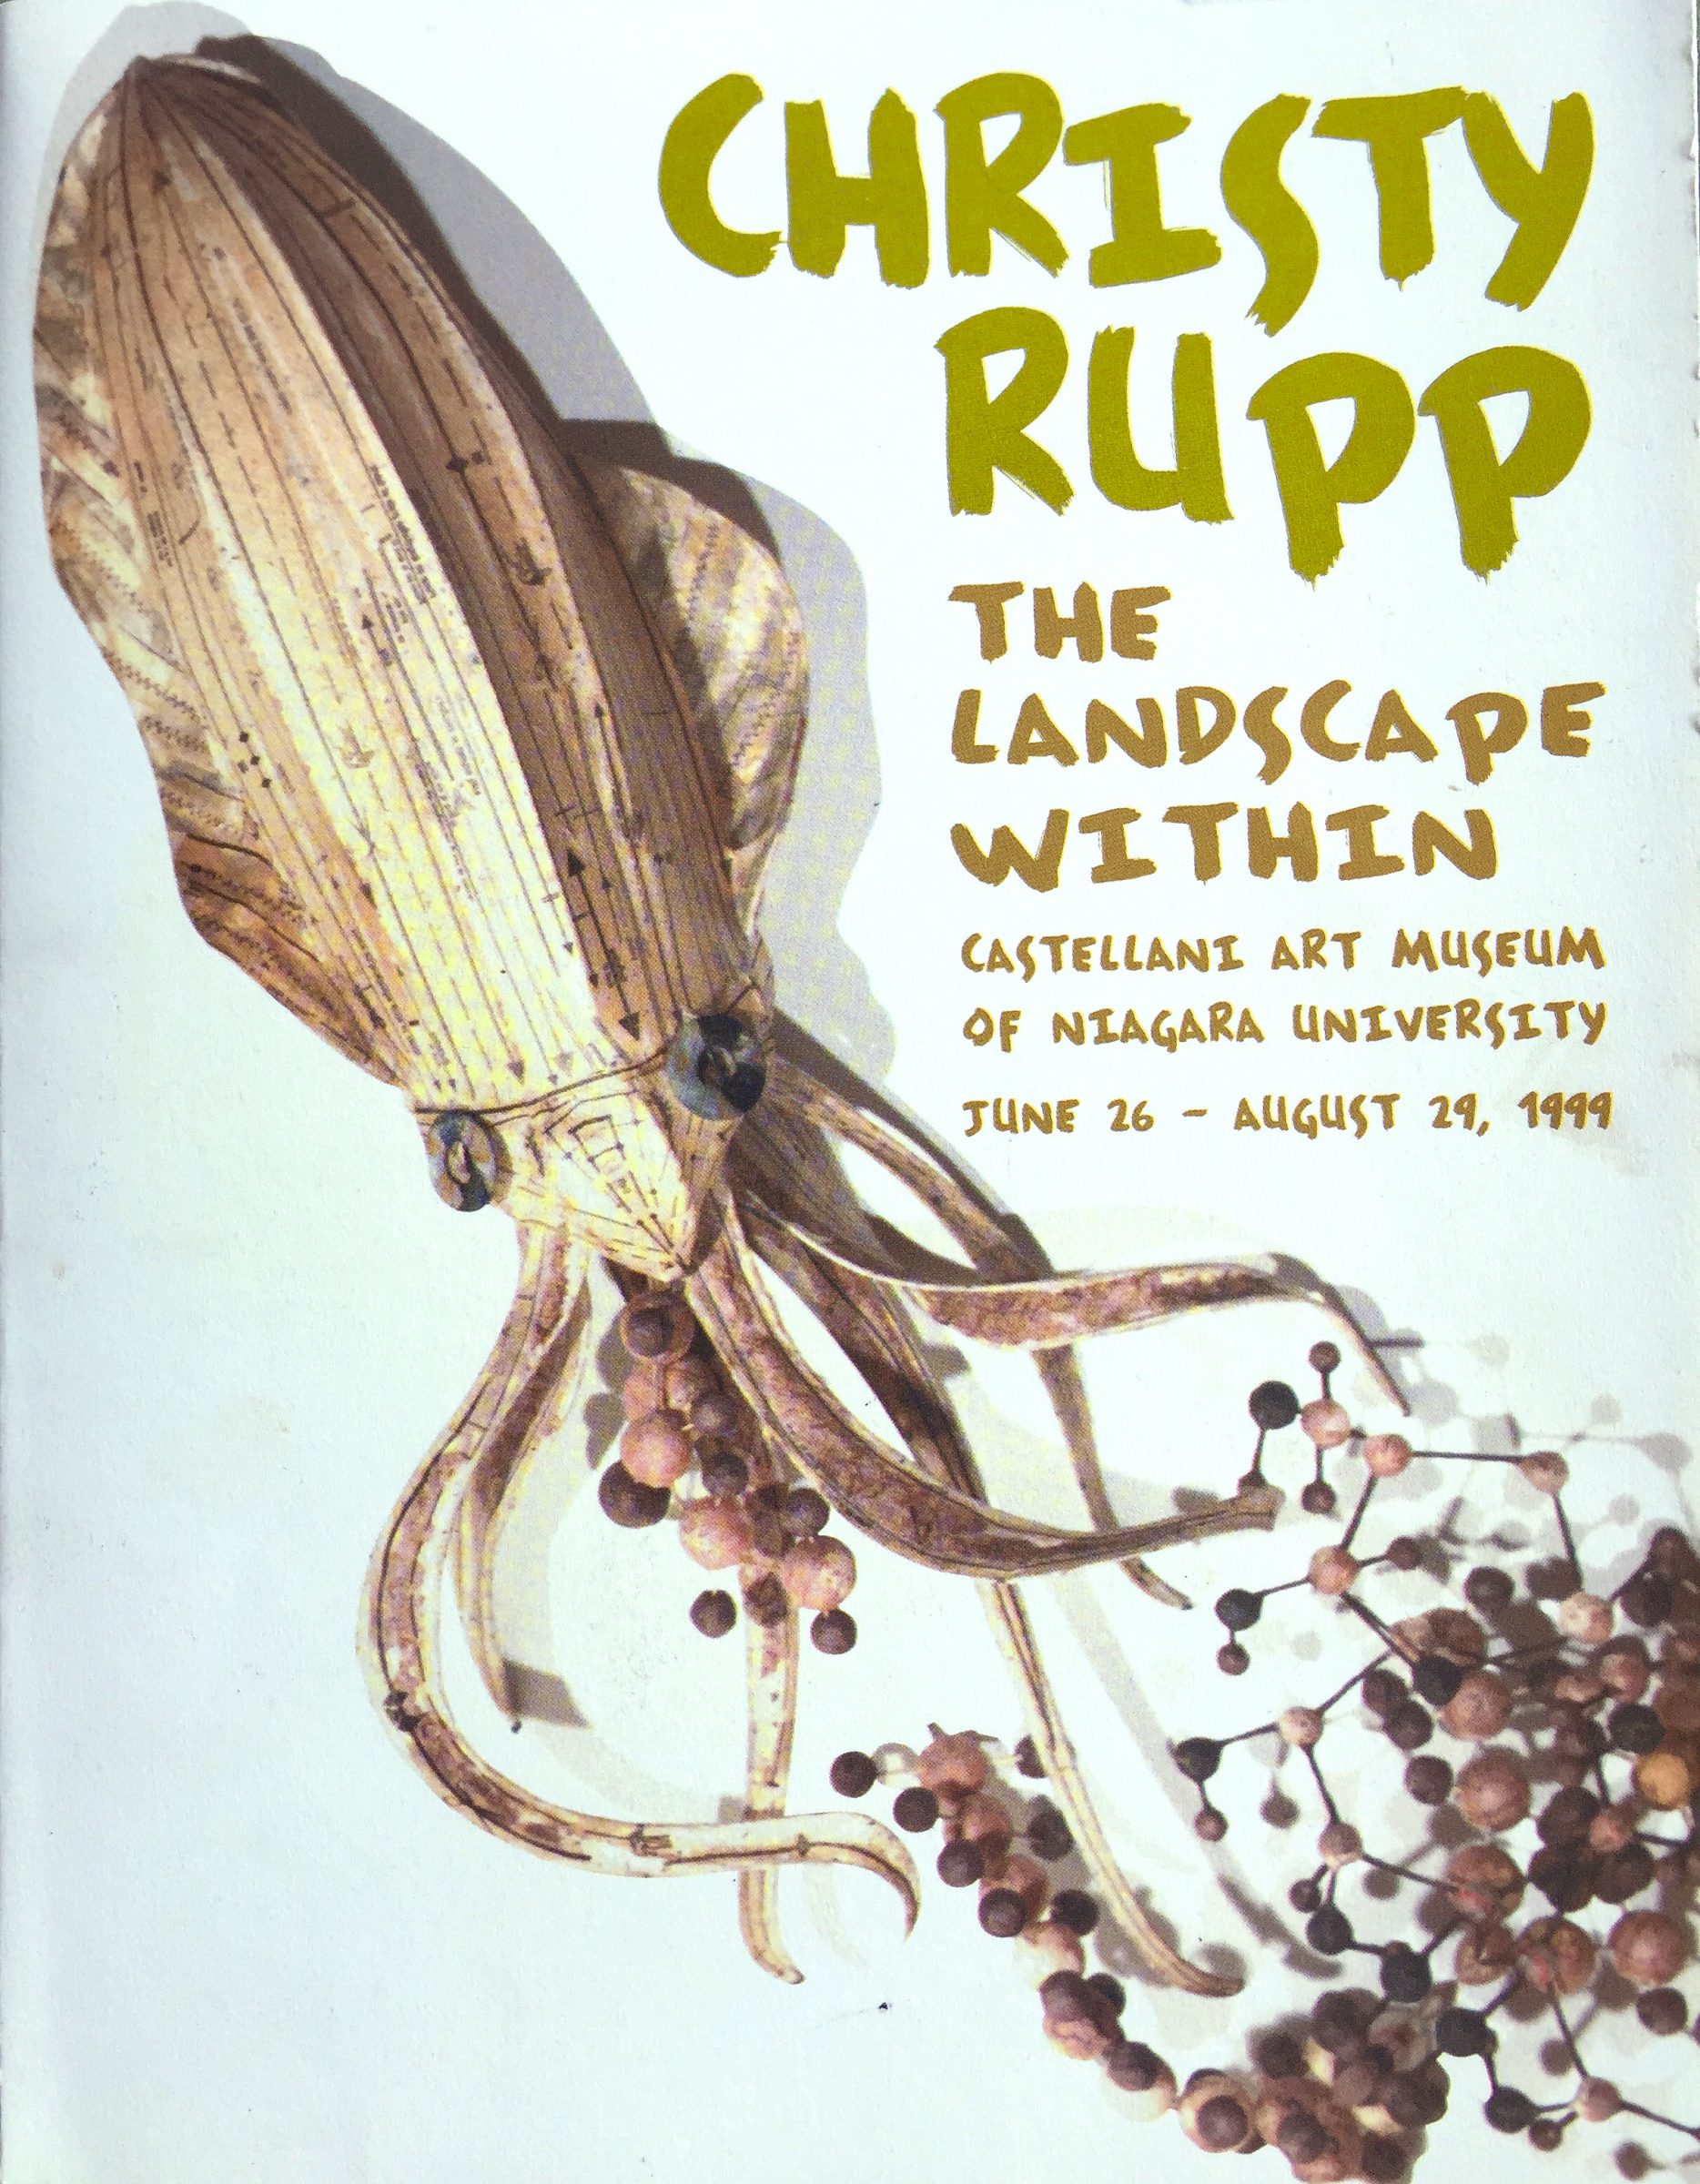 Cover of The Landscape Within catalog with large sculpture of a squid-like creature